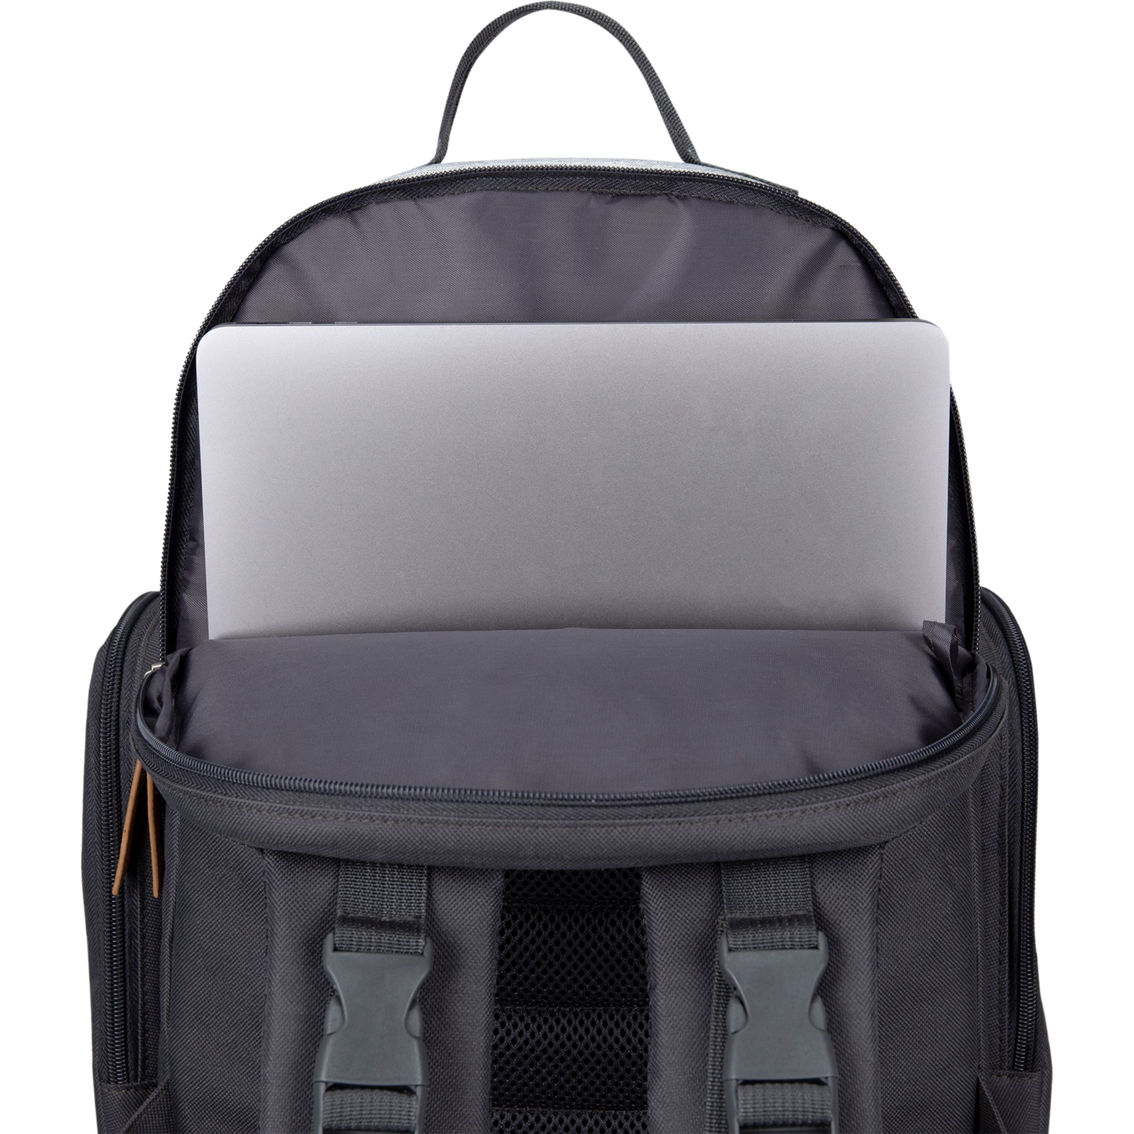 Baby Boom Gear Stonescape Backpack Diaper Bag - Image 7 of 7